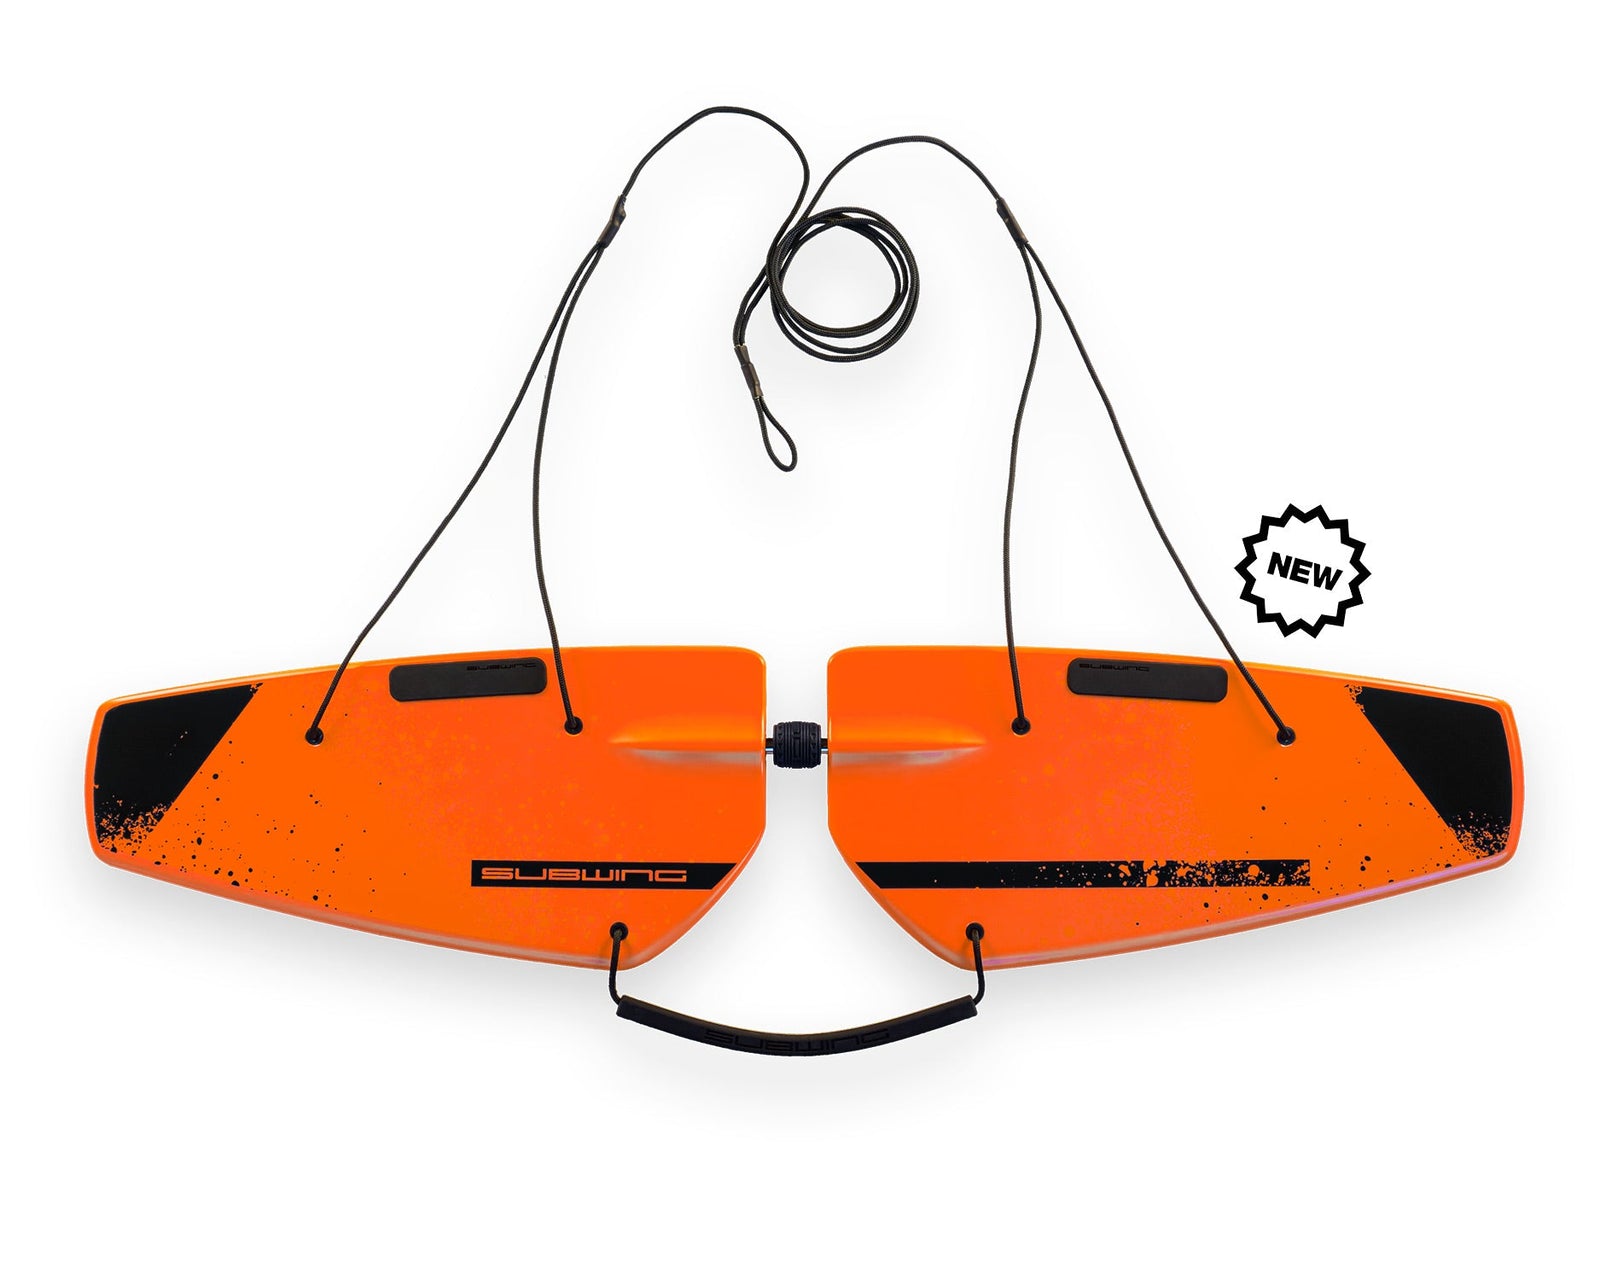 Subwing ⇒ Try the New Towable Underwater Watersport Board